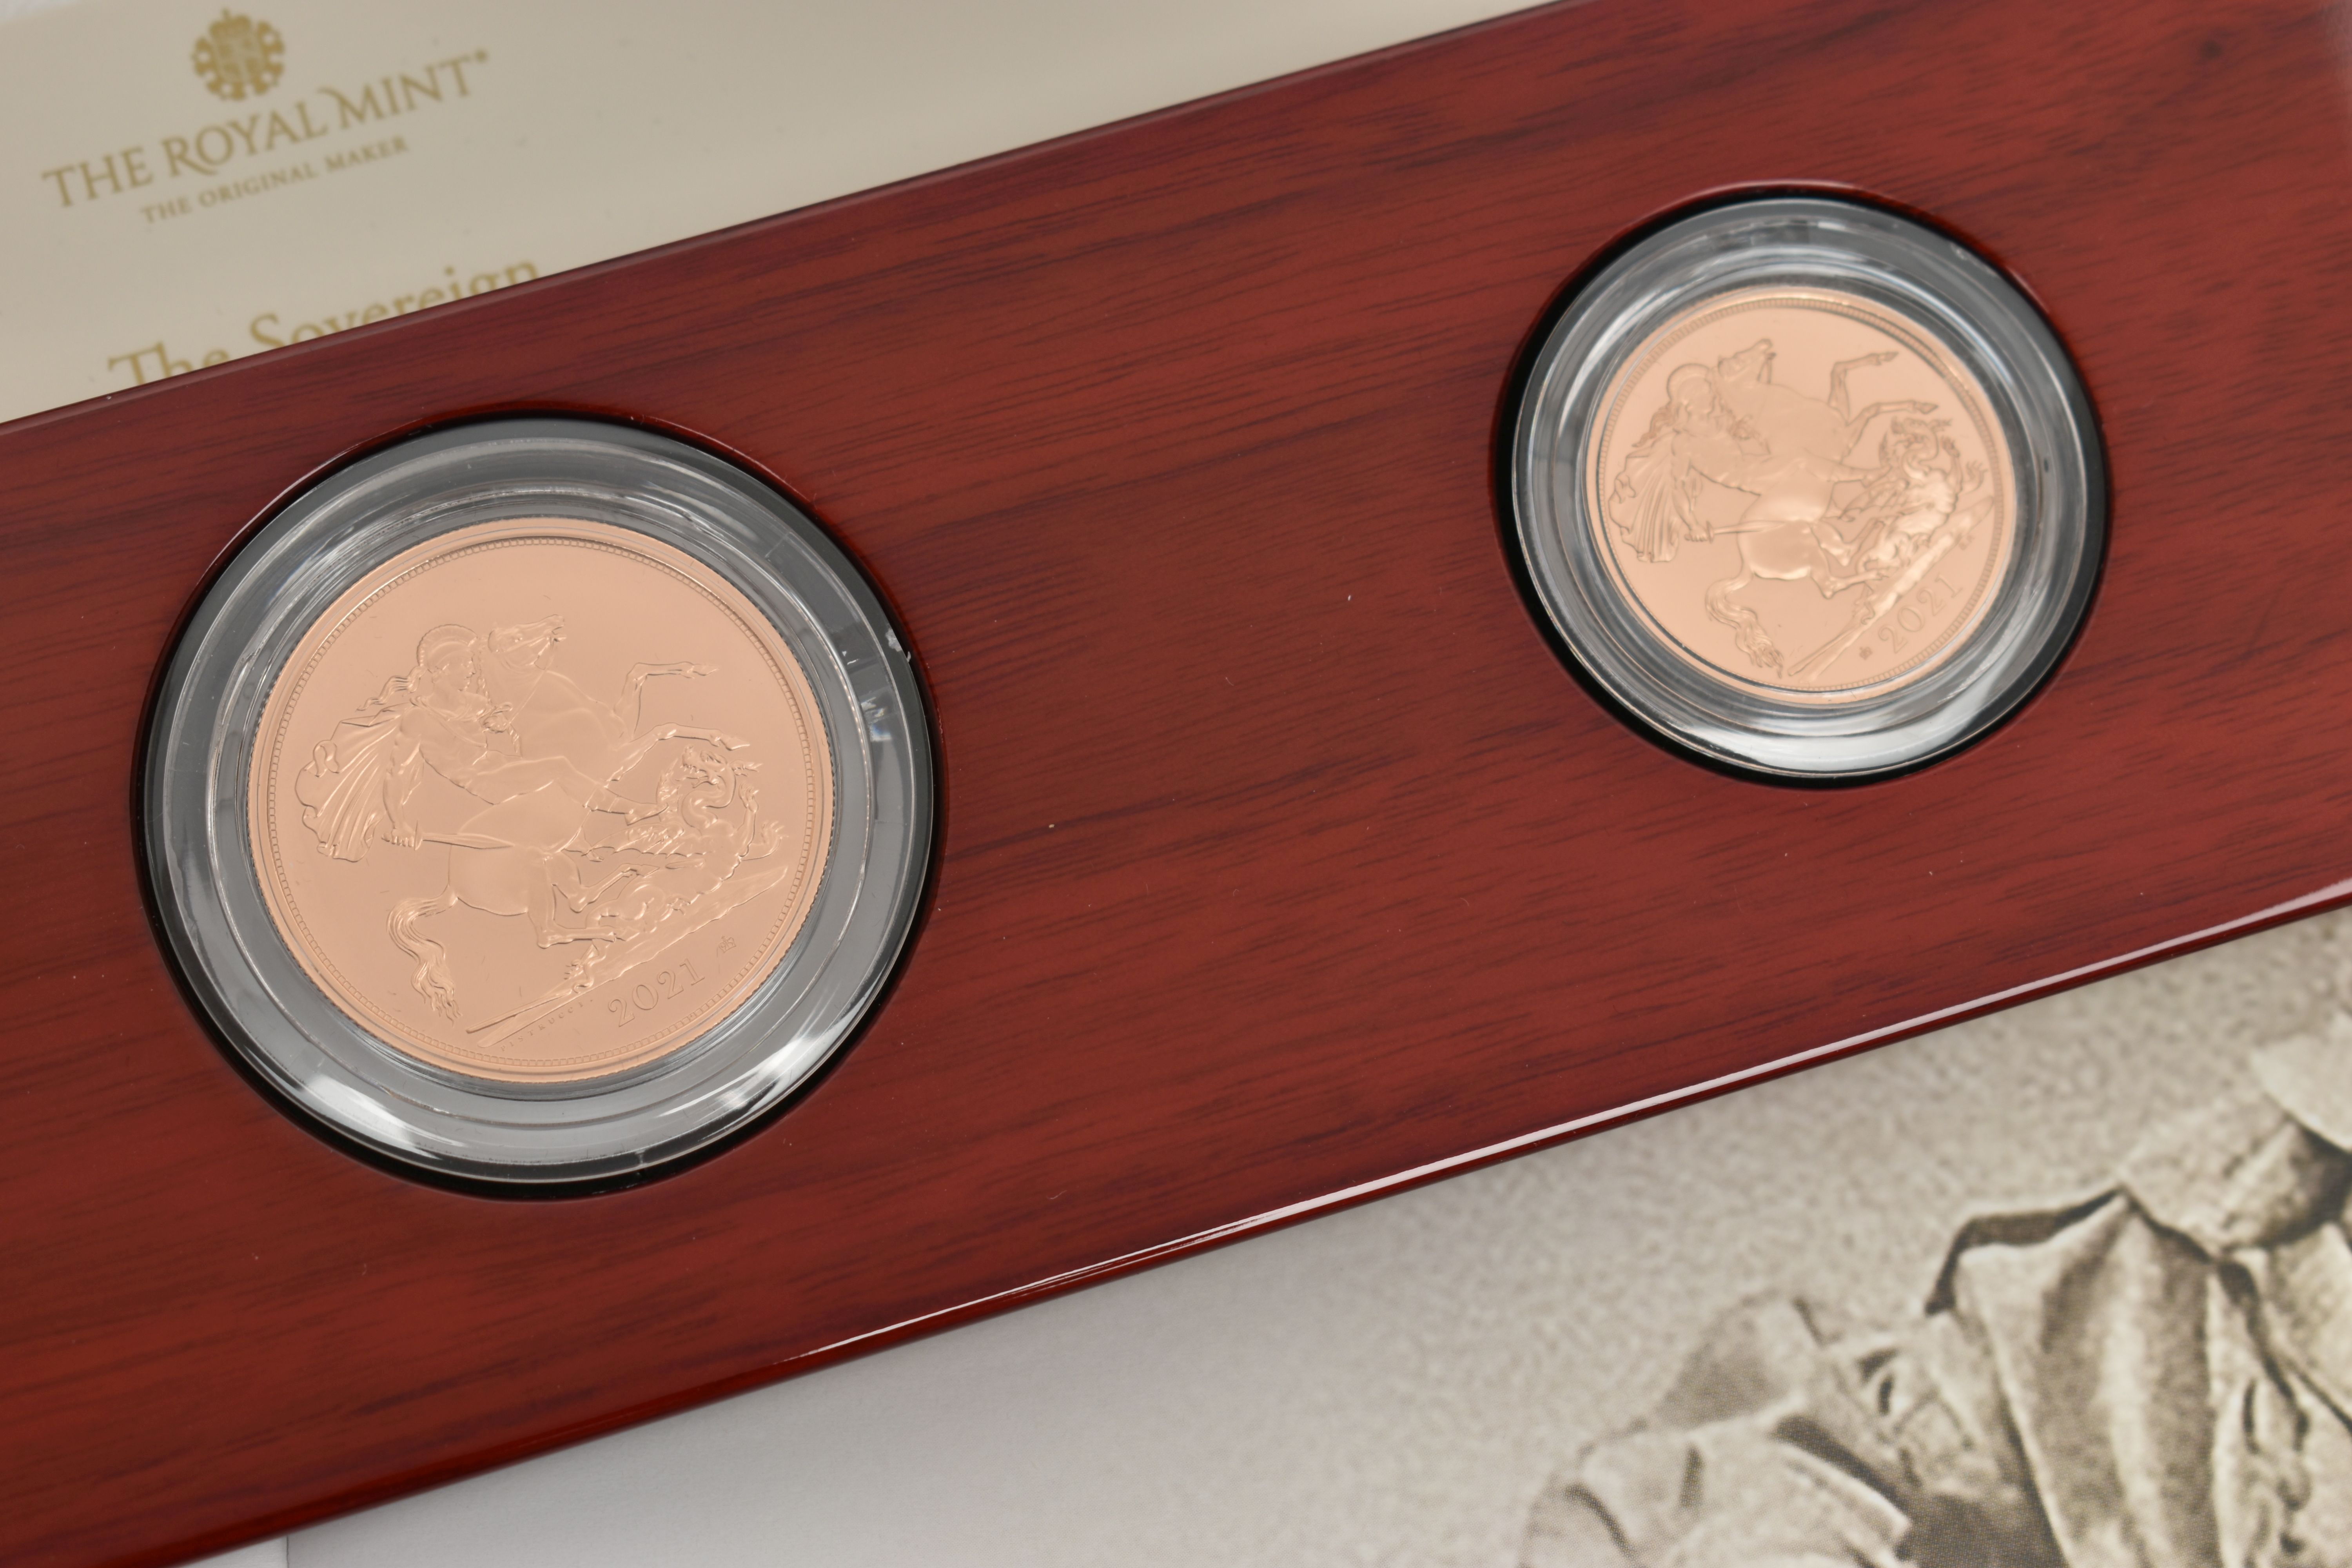 A BOXED ROYAL MINT 'THE SOVEREIGN 2021 FIVE-COIN GOLD PROOF SET' - Image 3 of 5